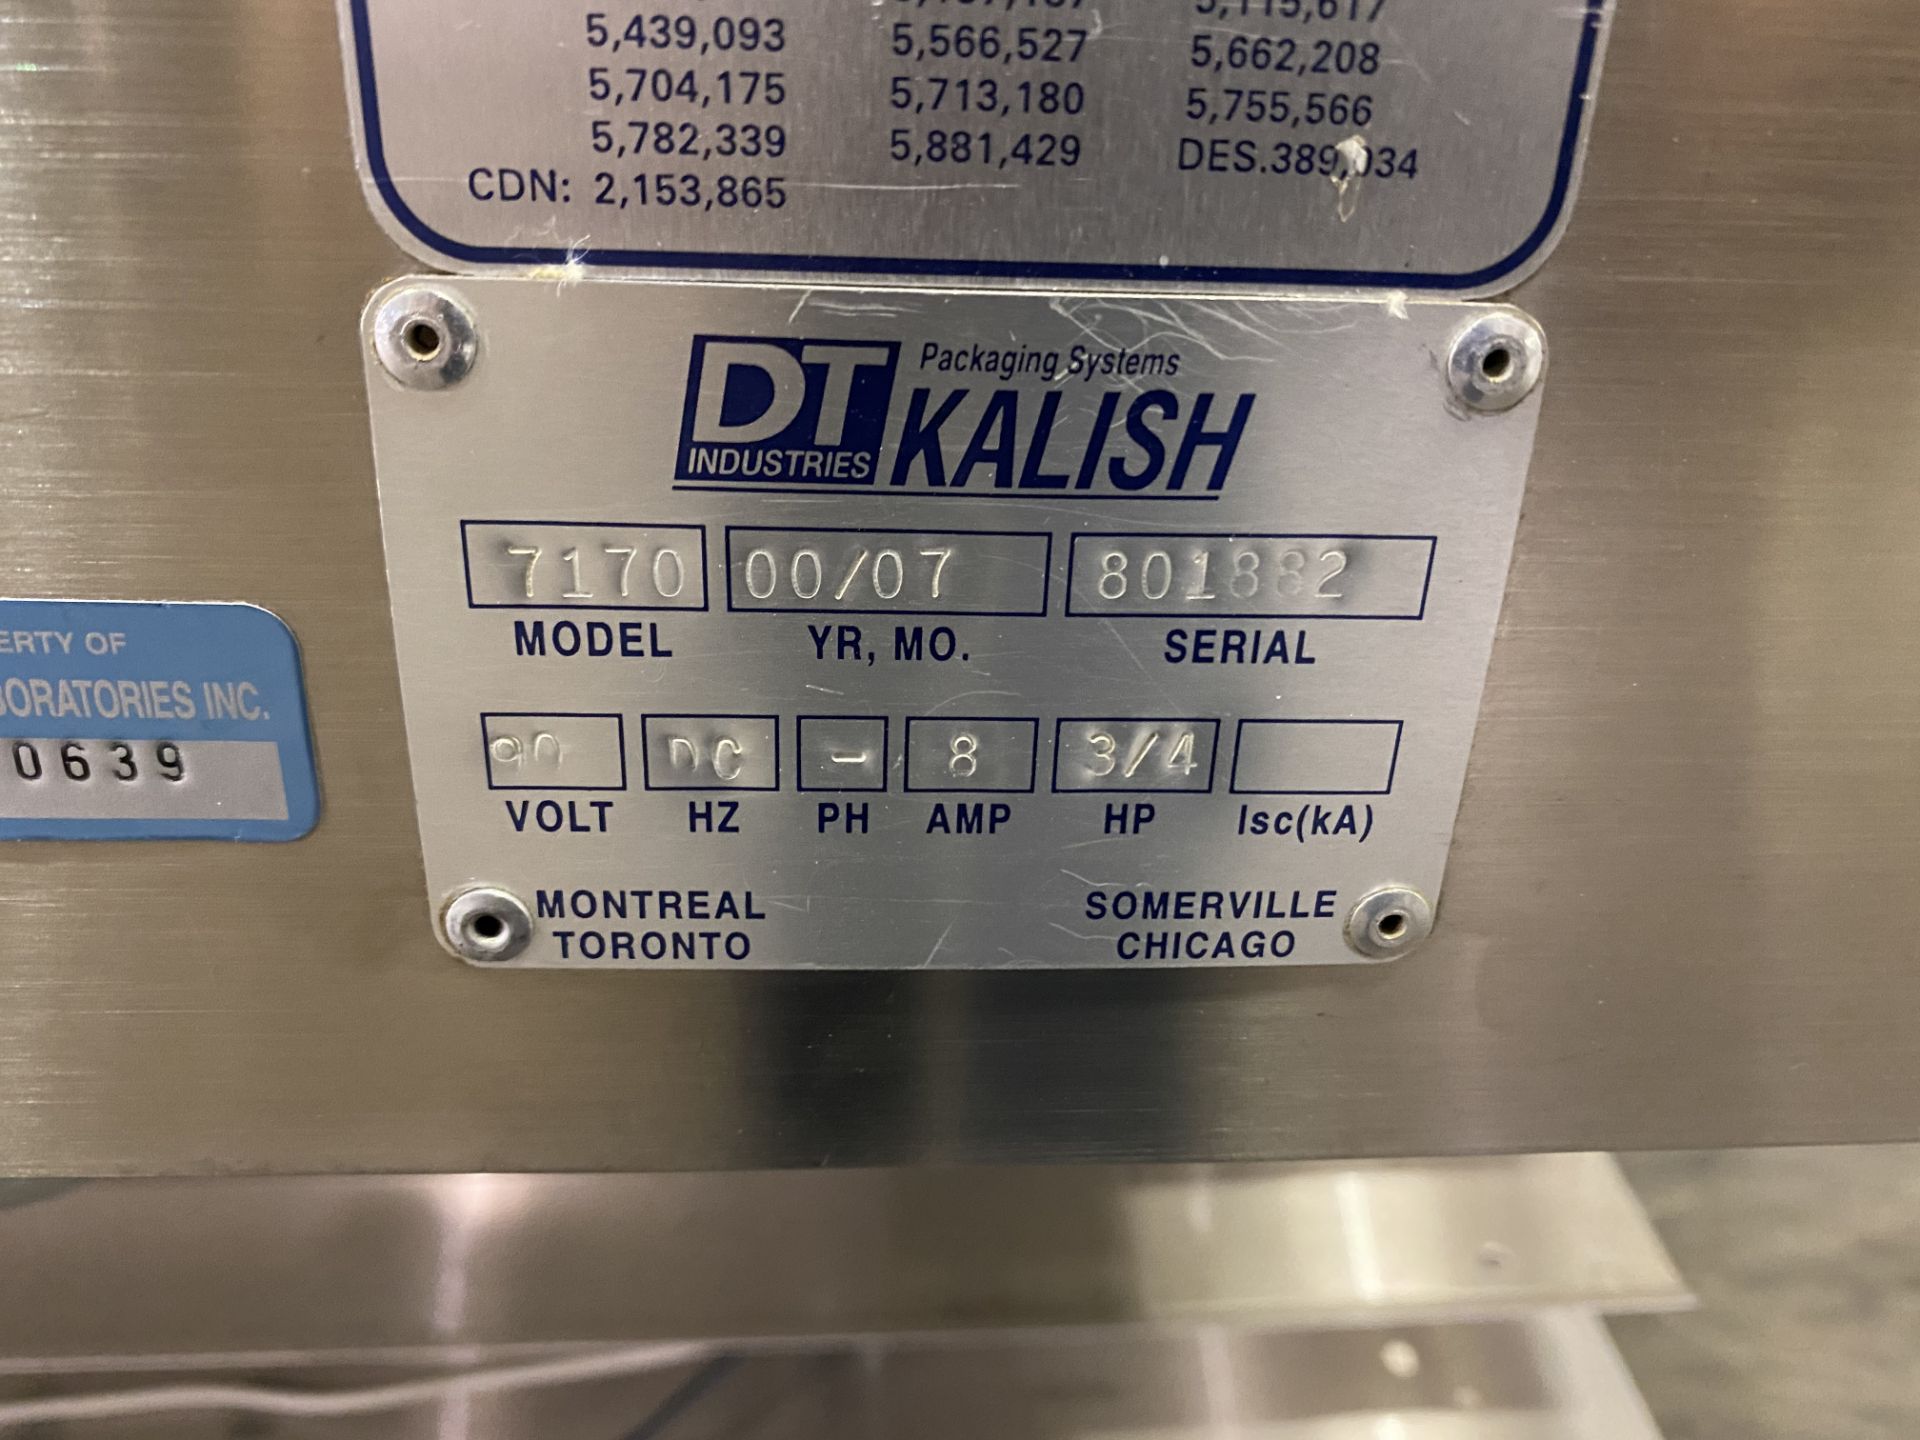 DT Industries Kalish 8005 sn 802010 (Swiftpack Automation Model S12P3PTS sn M2777/8), 120V,1ph, 60Hz - Image 20 of 23